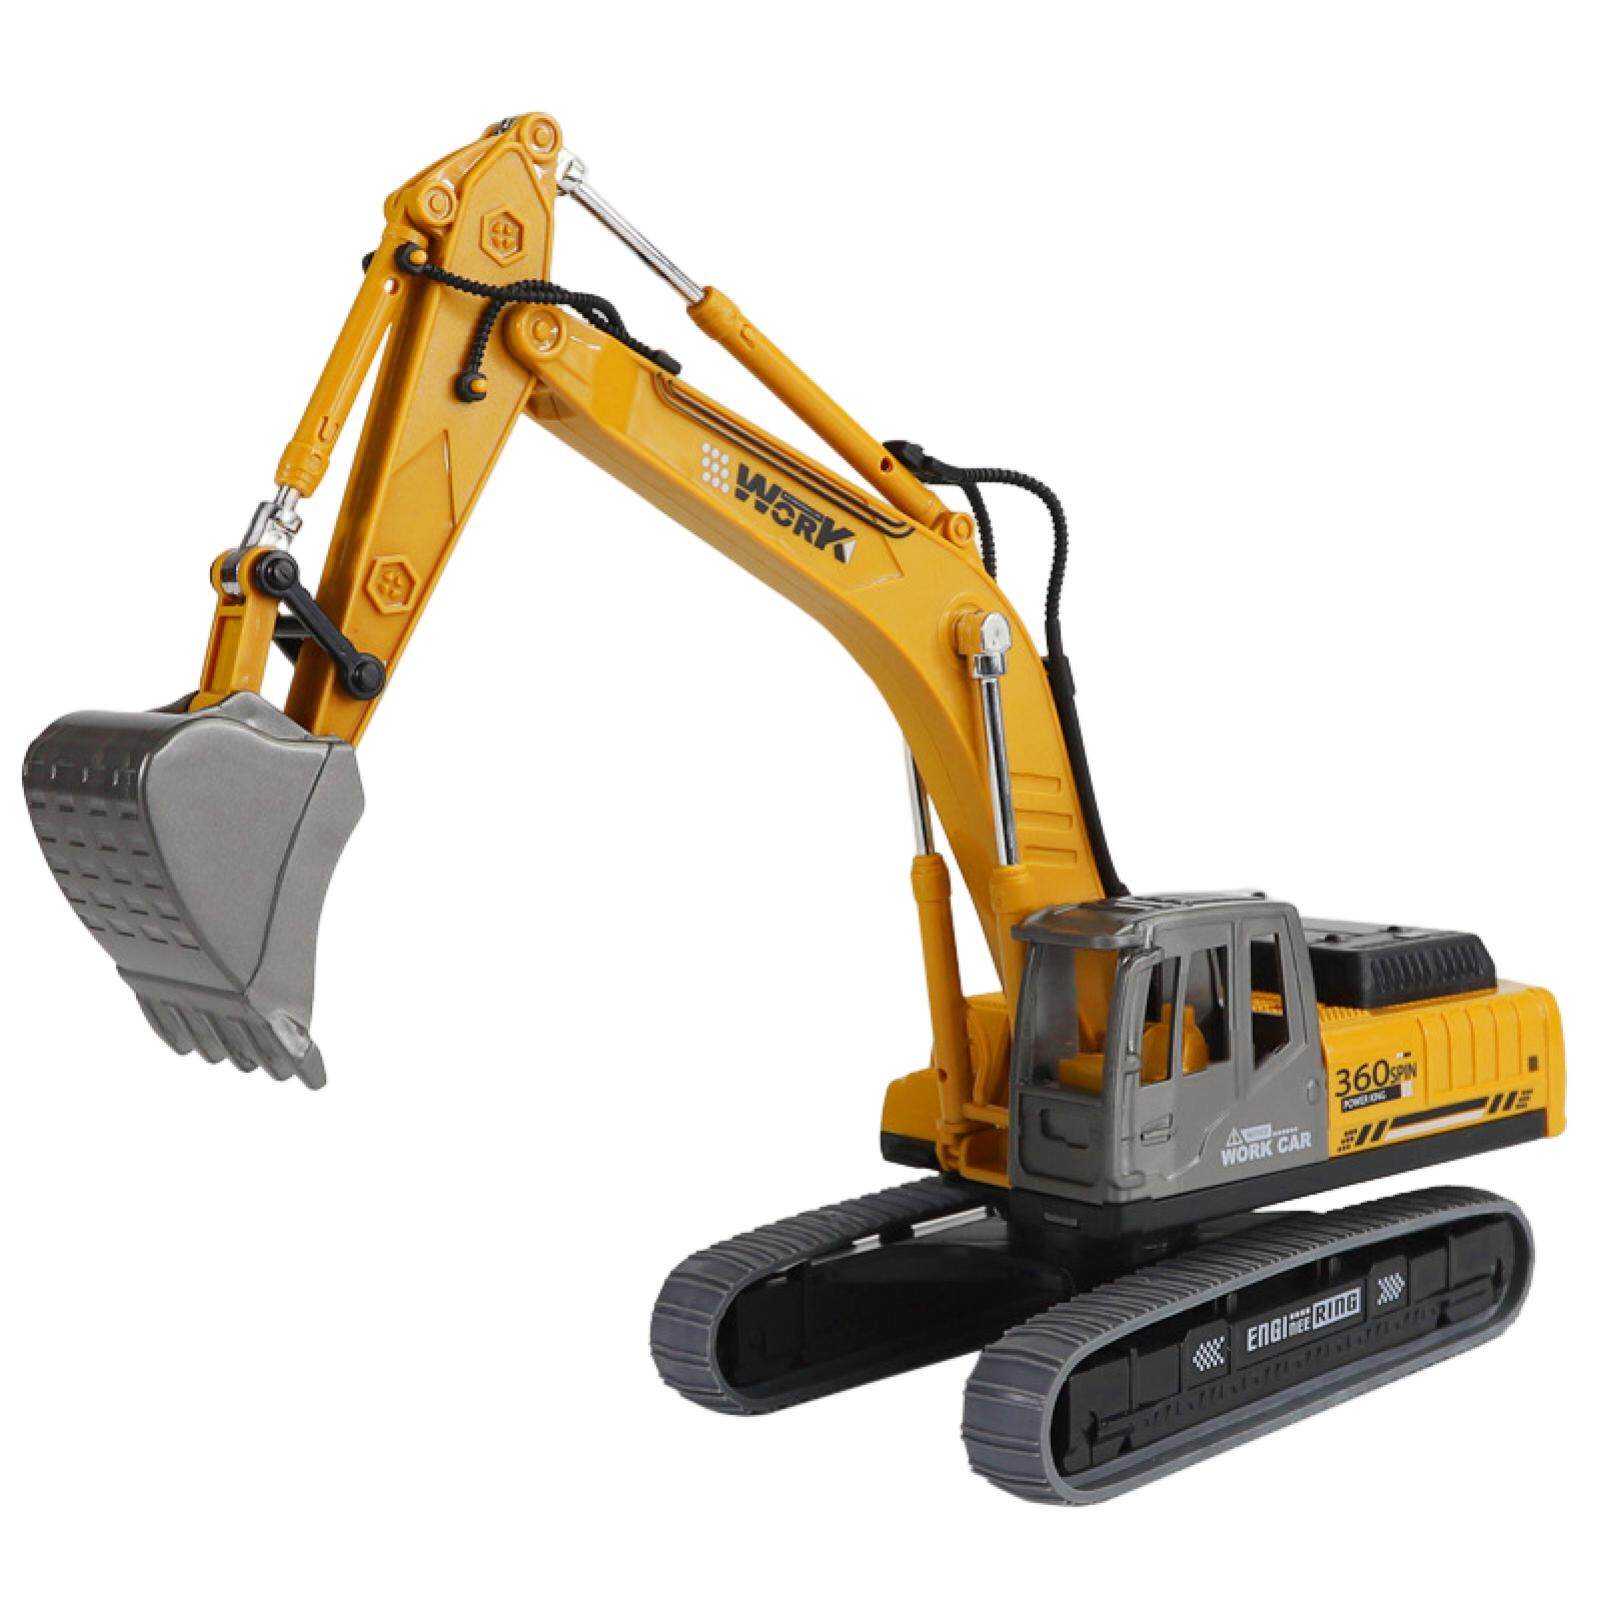 Excavator Toy 360-Degree Rotation Flexible Digging Arm 1 36 Scale